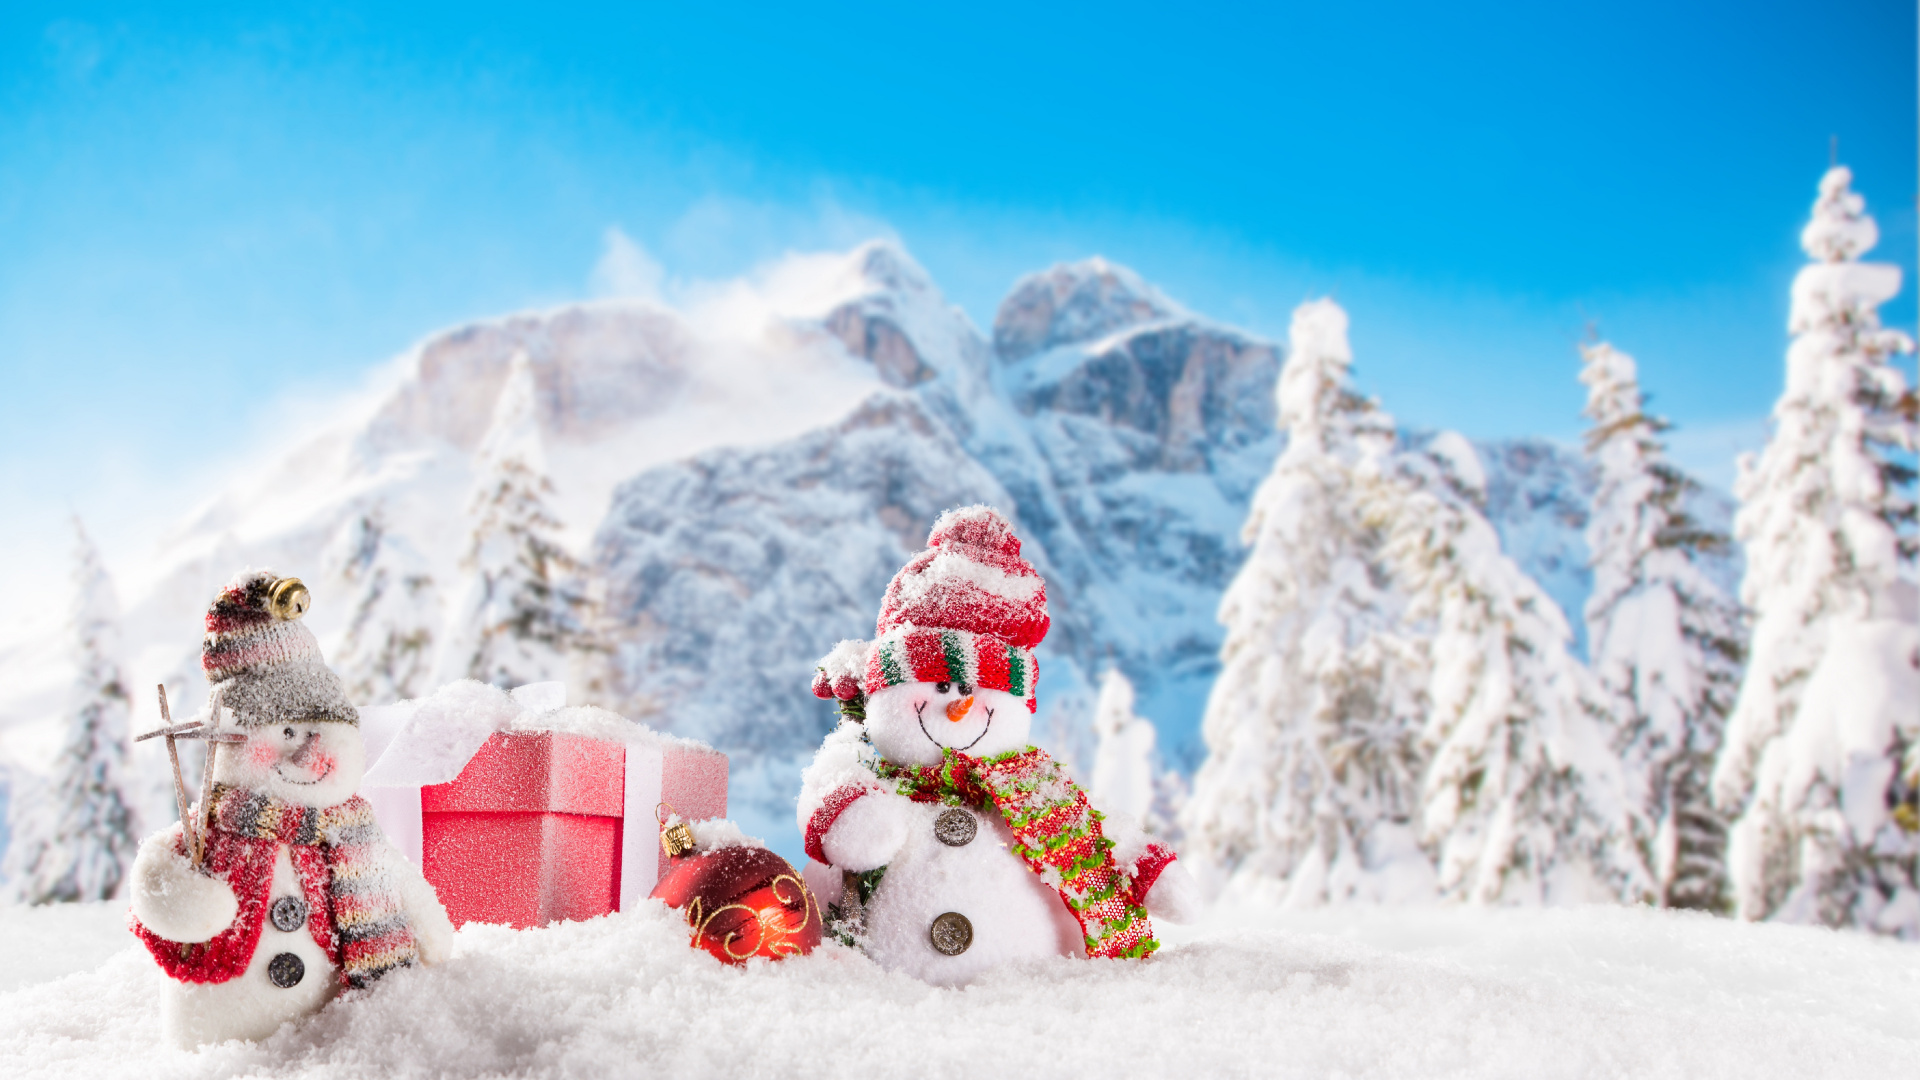 Red and White Santa Claus on Snow Covered Ground During Daytime. Wallpaper in 1920x1080 Resolution